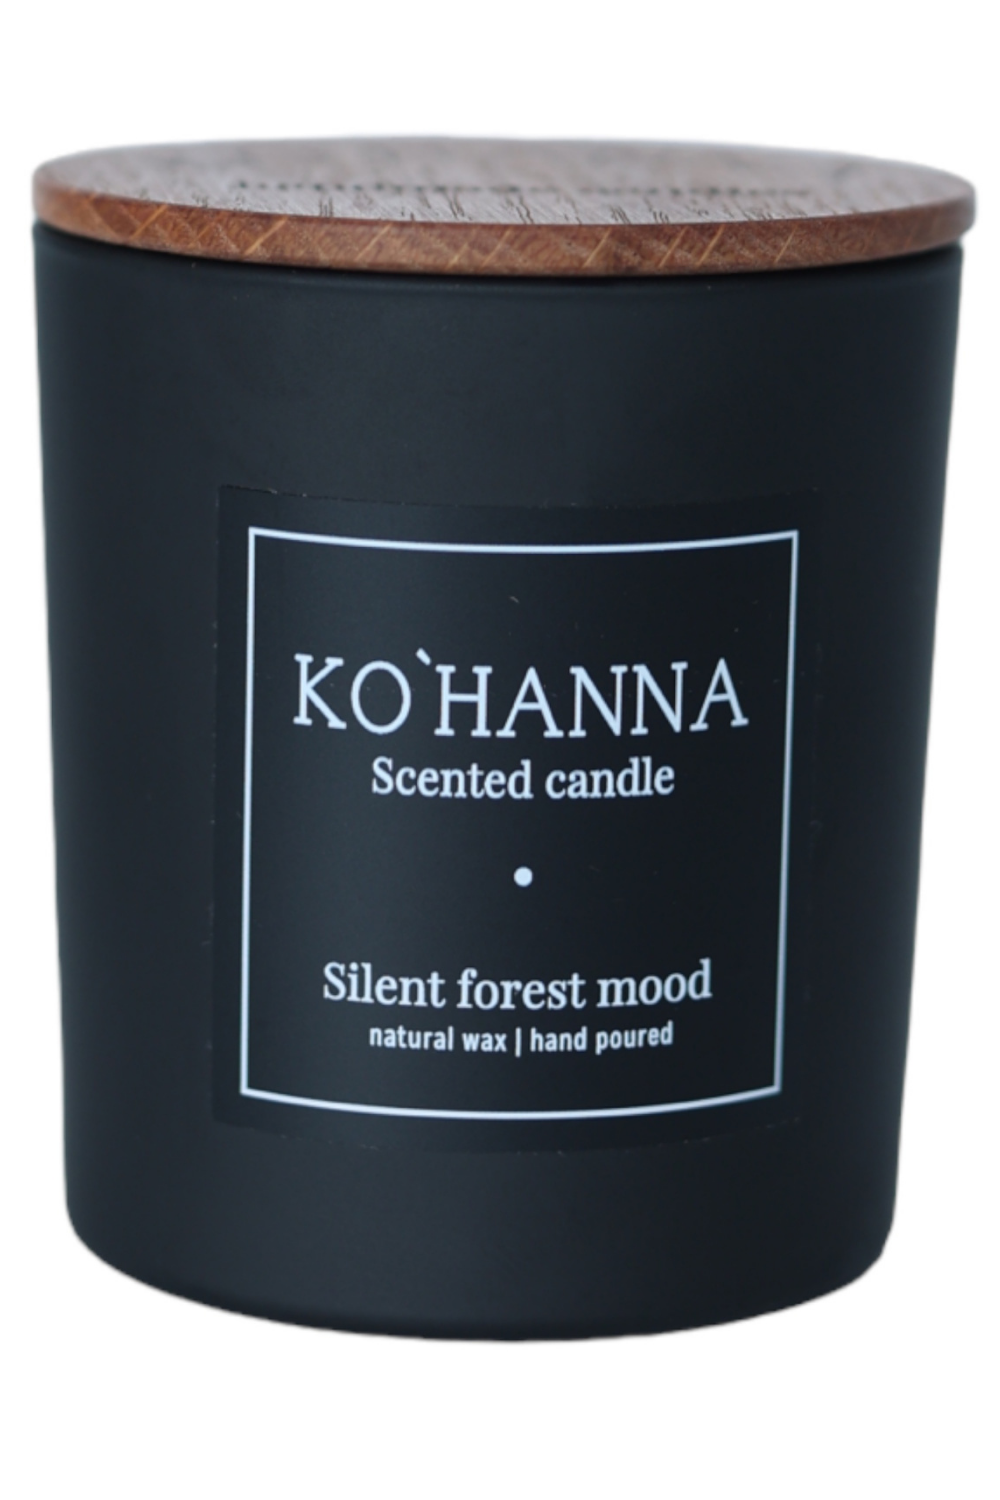 Black frosted glass, handmade scented candle, Mood of the Silent Forest, 250 ml. (KO&